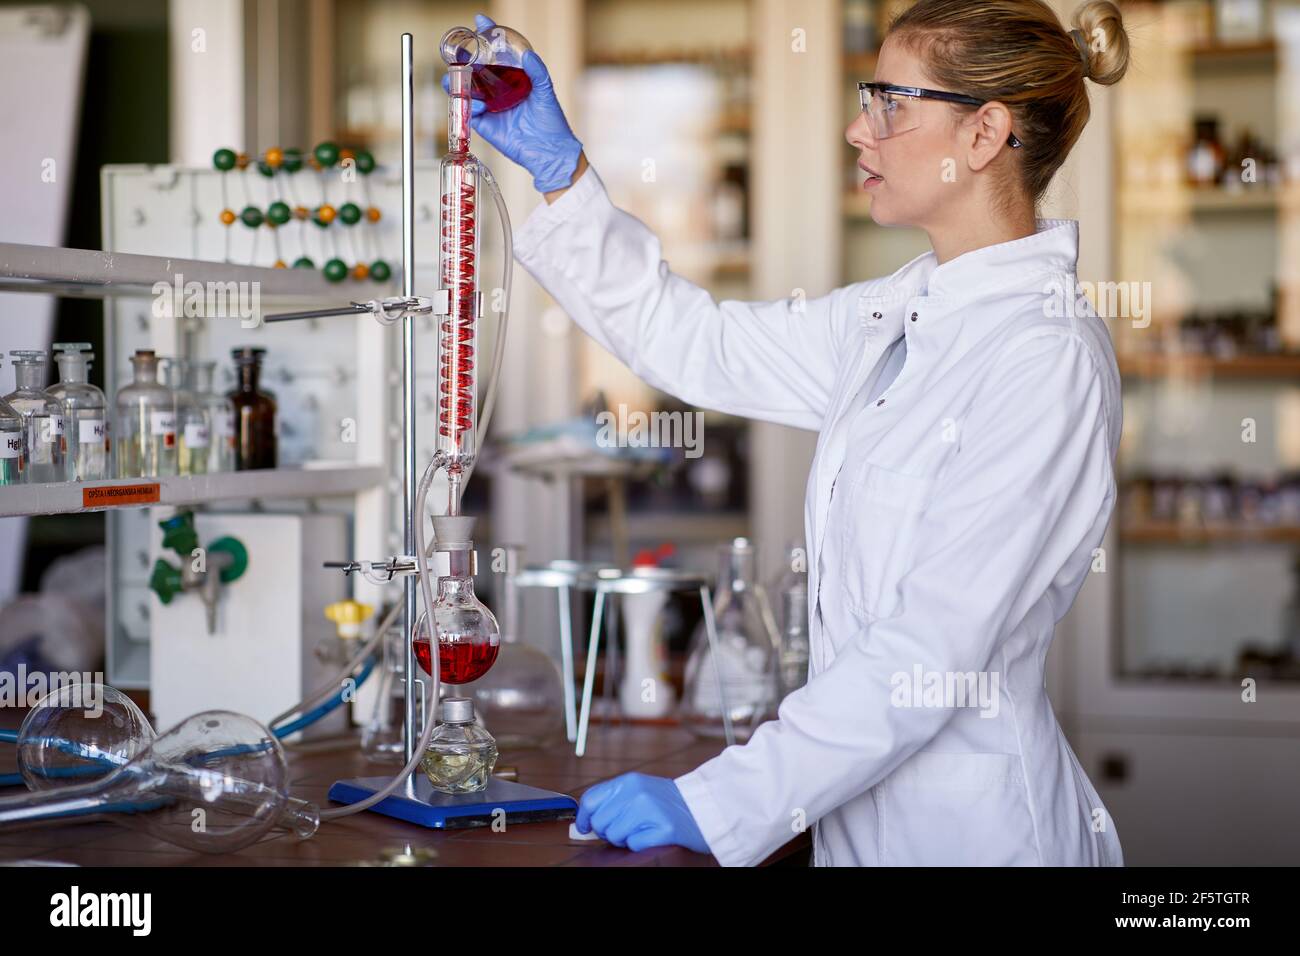 A young female scientist using an apparatus for the experiment in a working atmosphere at the university laboratory. Science, chemistry, lab, people Stock Photo